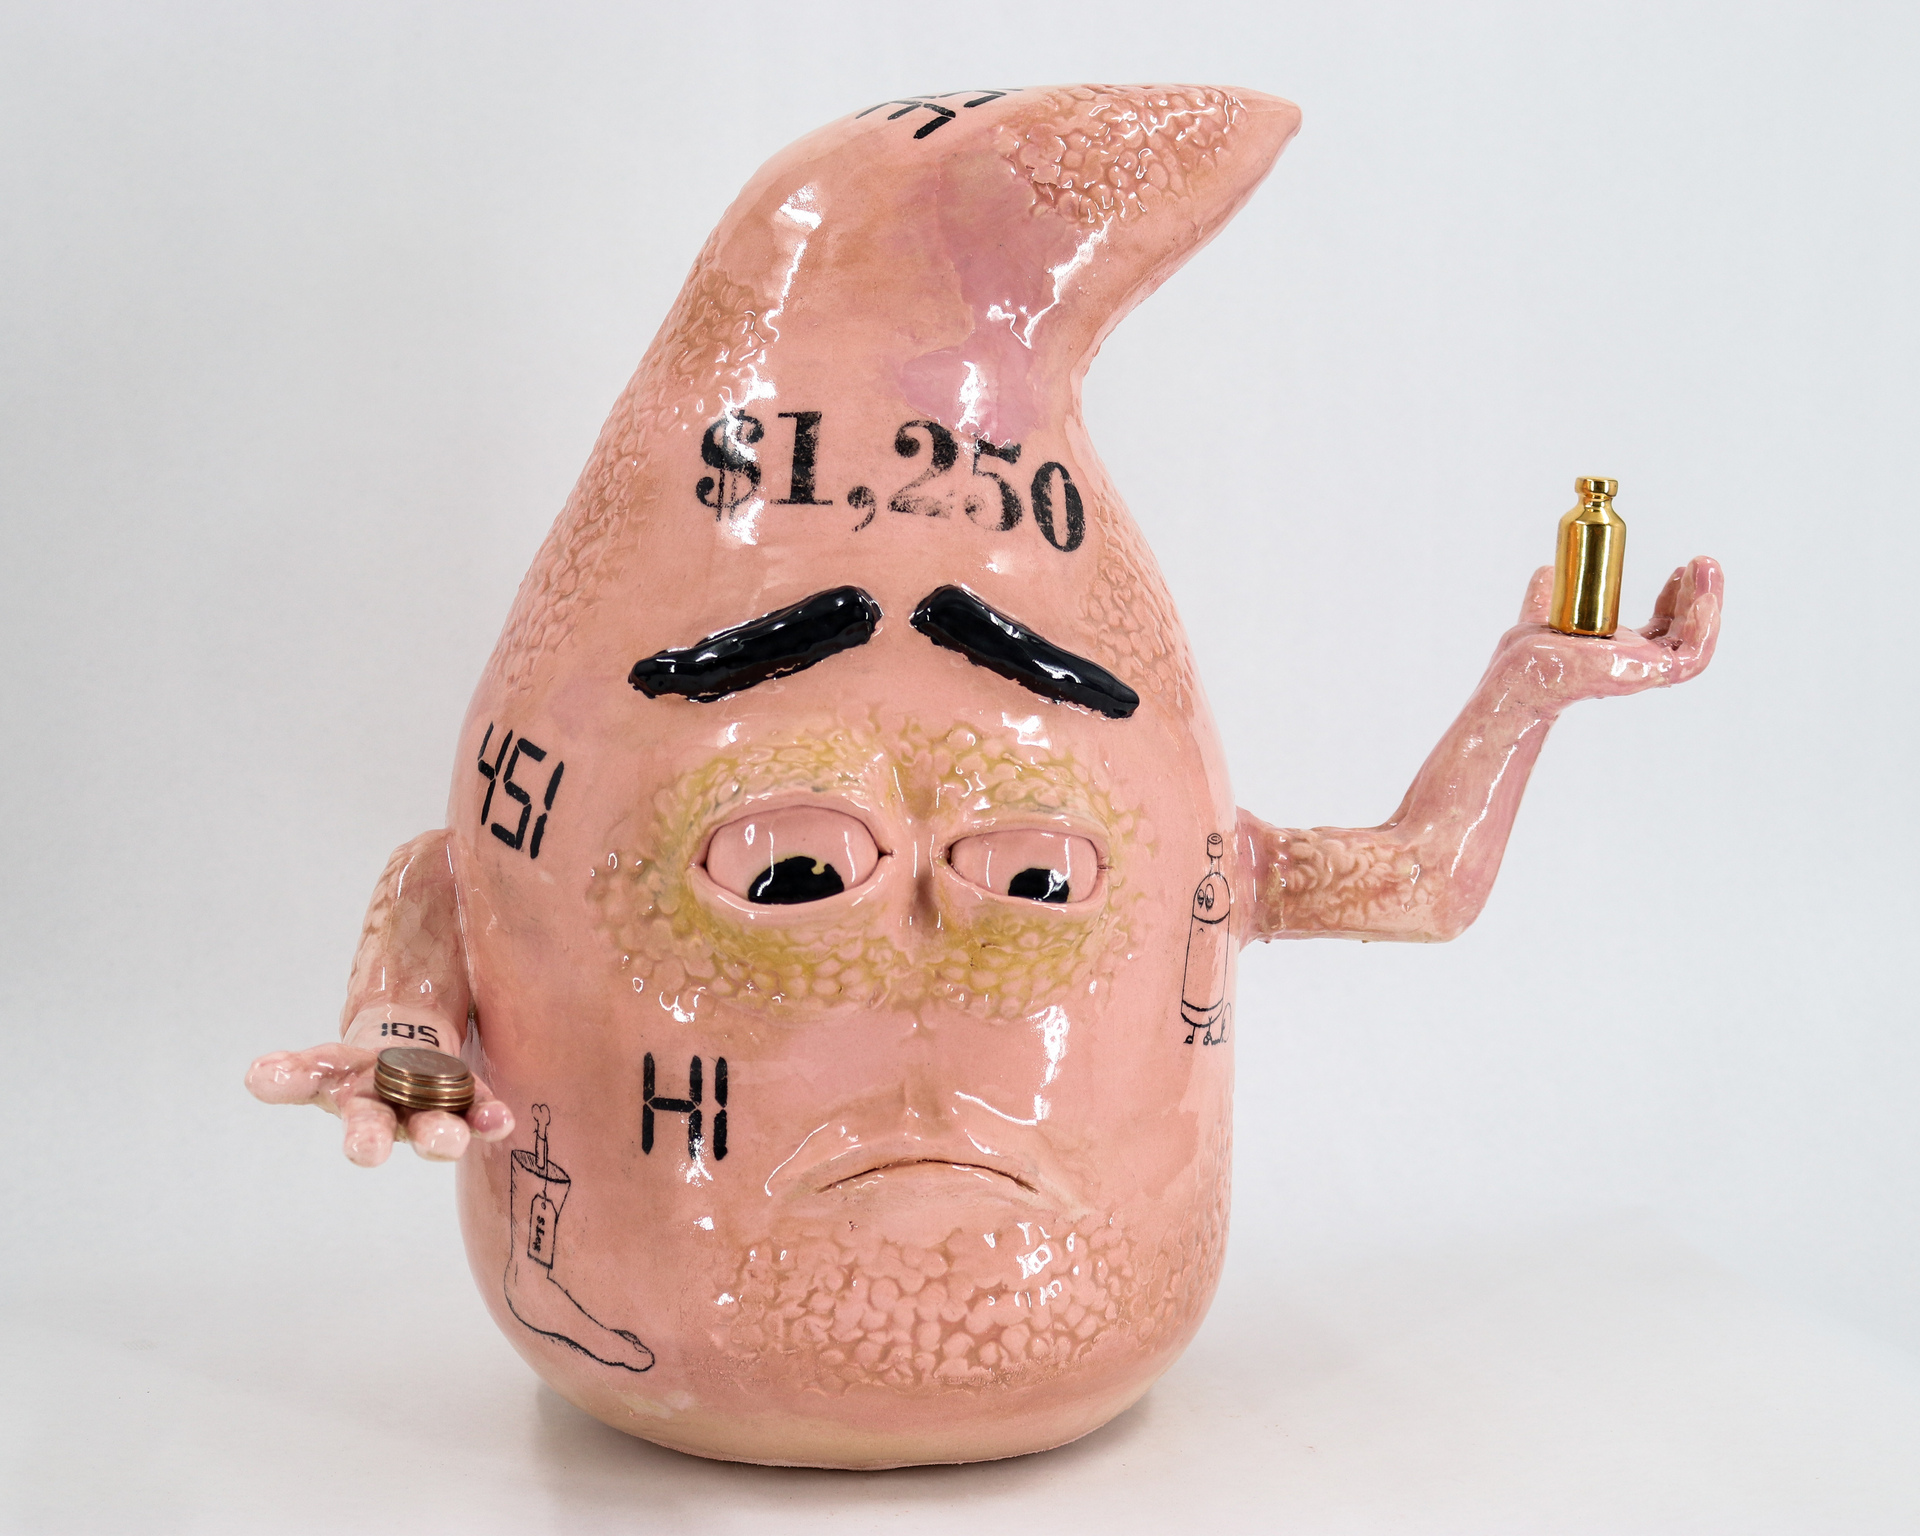 Mick Schoon clay figure with distressed facial expression and arms holding objects that depict the dilemma of making difficult choices between paying for health and other life necessities.